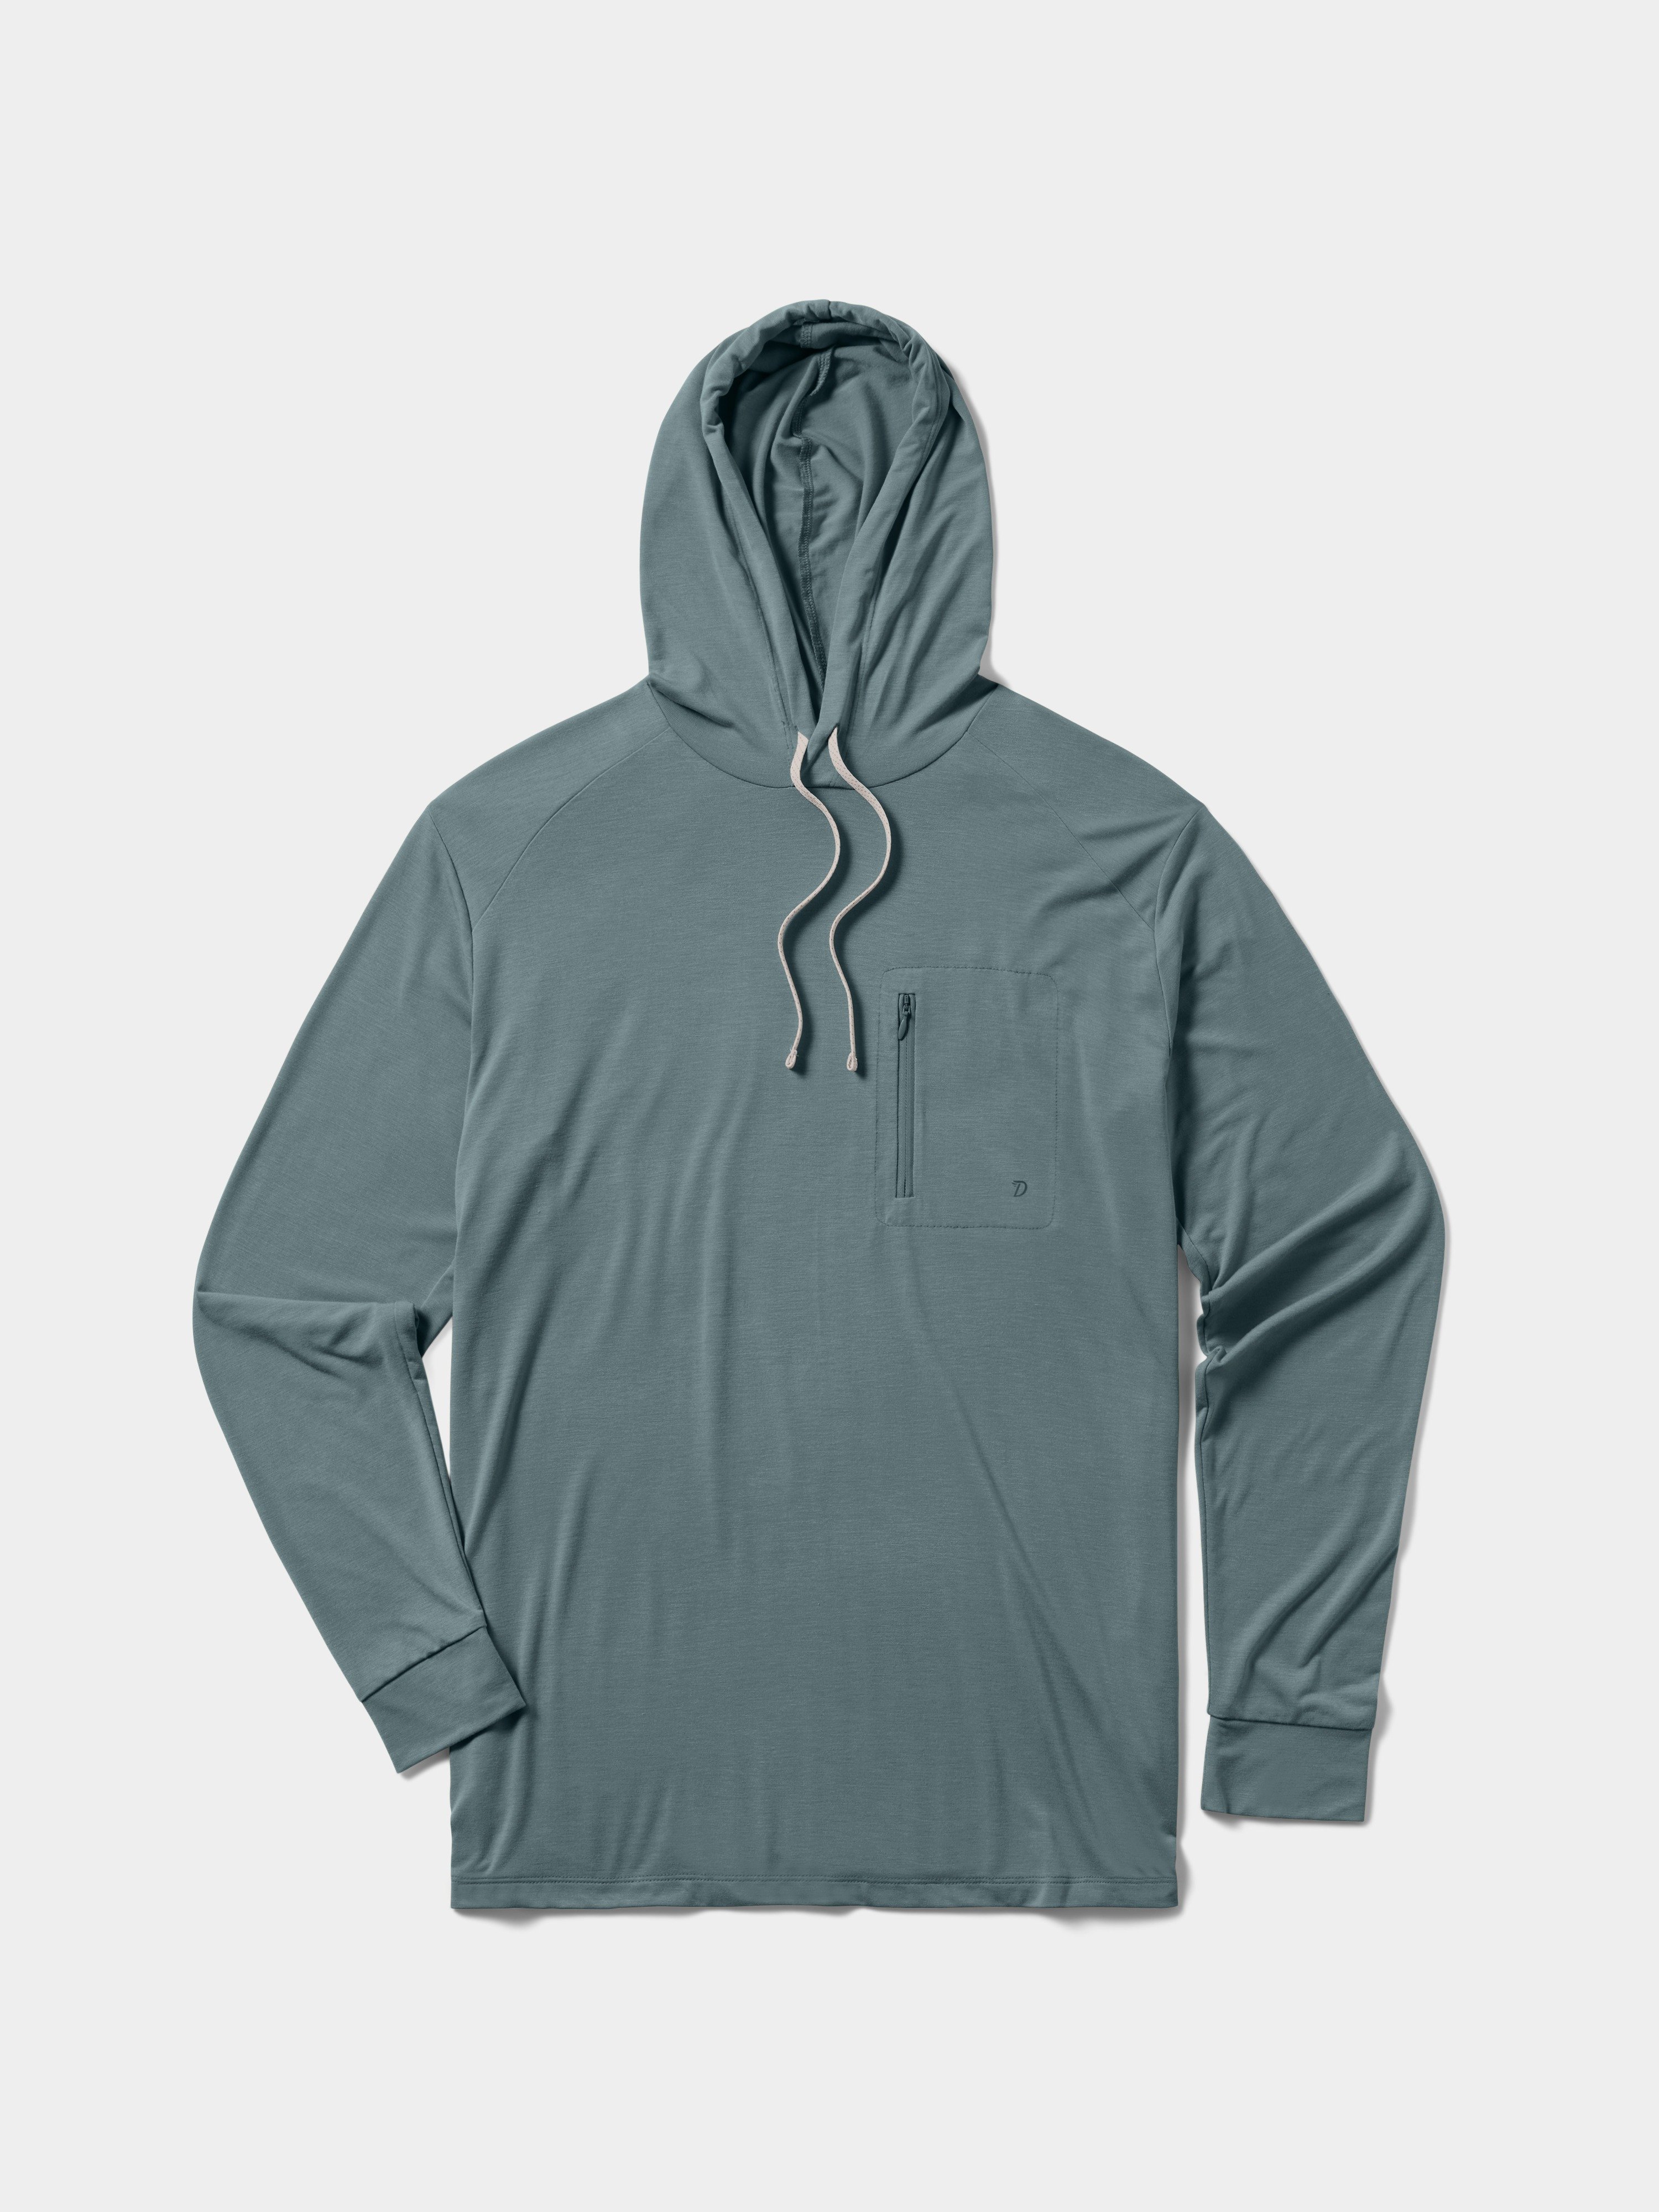 Affordable Wholesale bamboo hood shirt For Smooth Fishing 